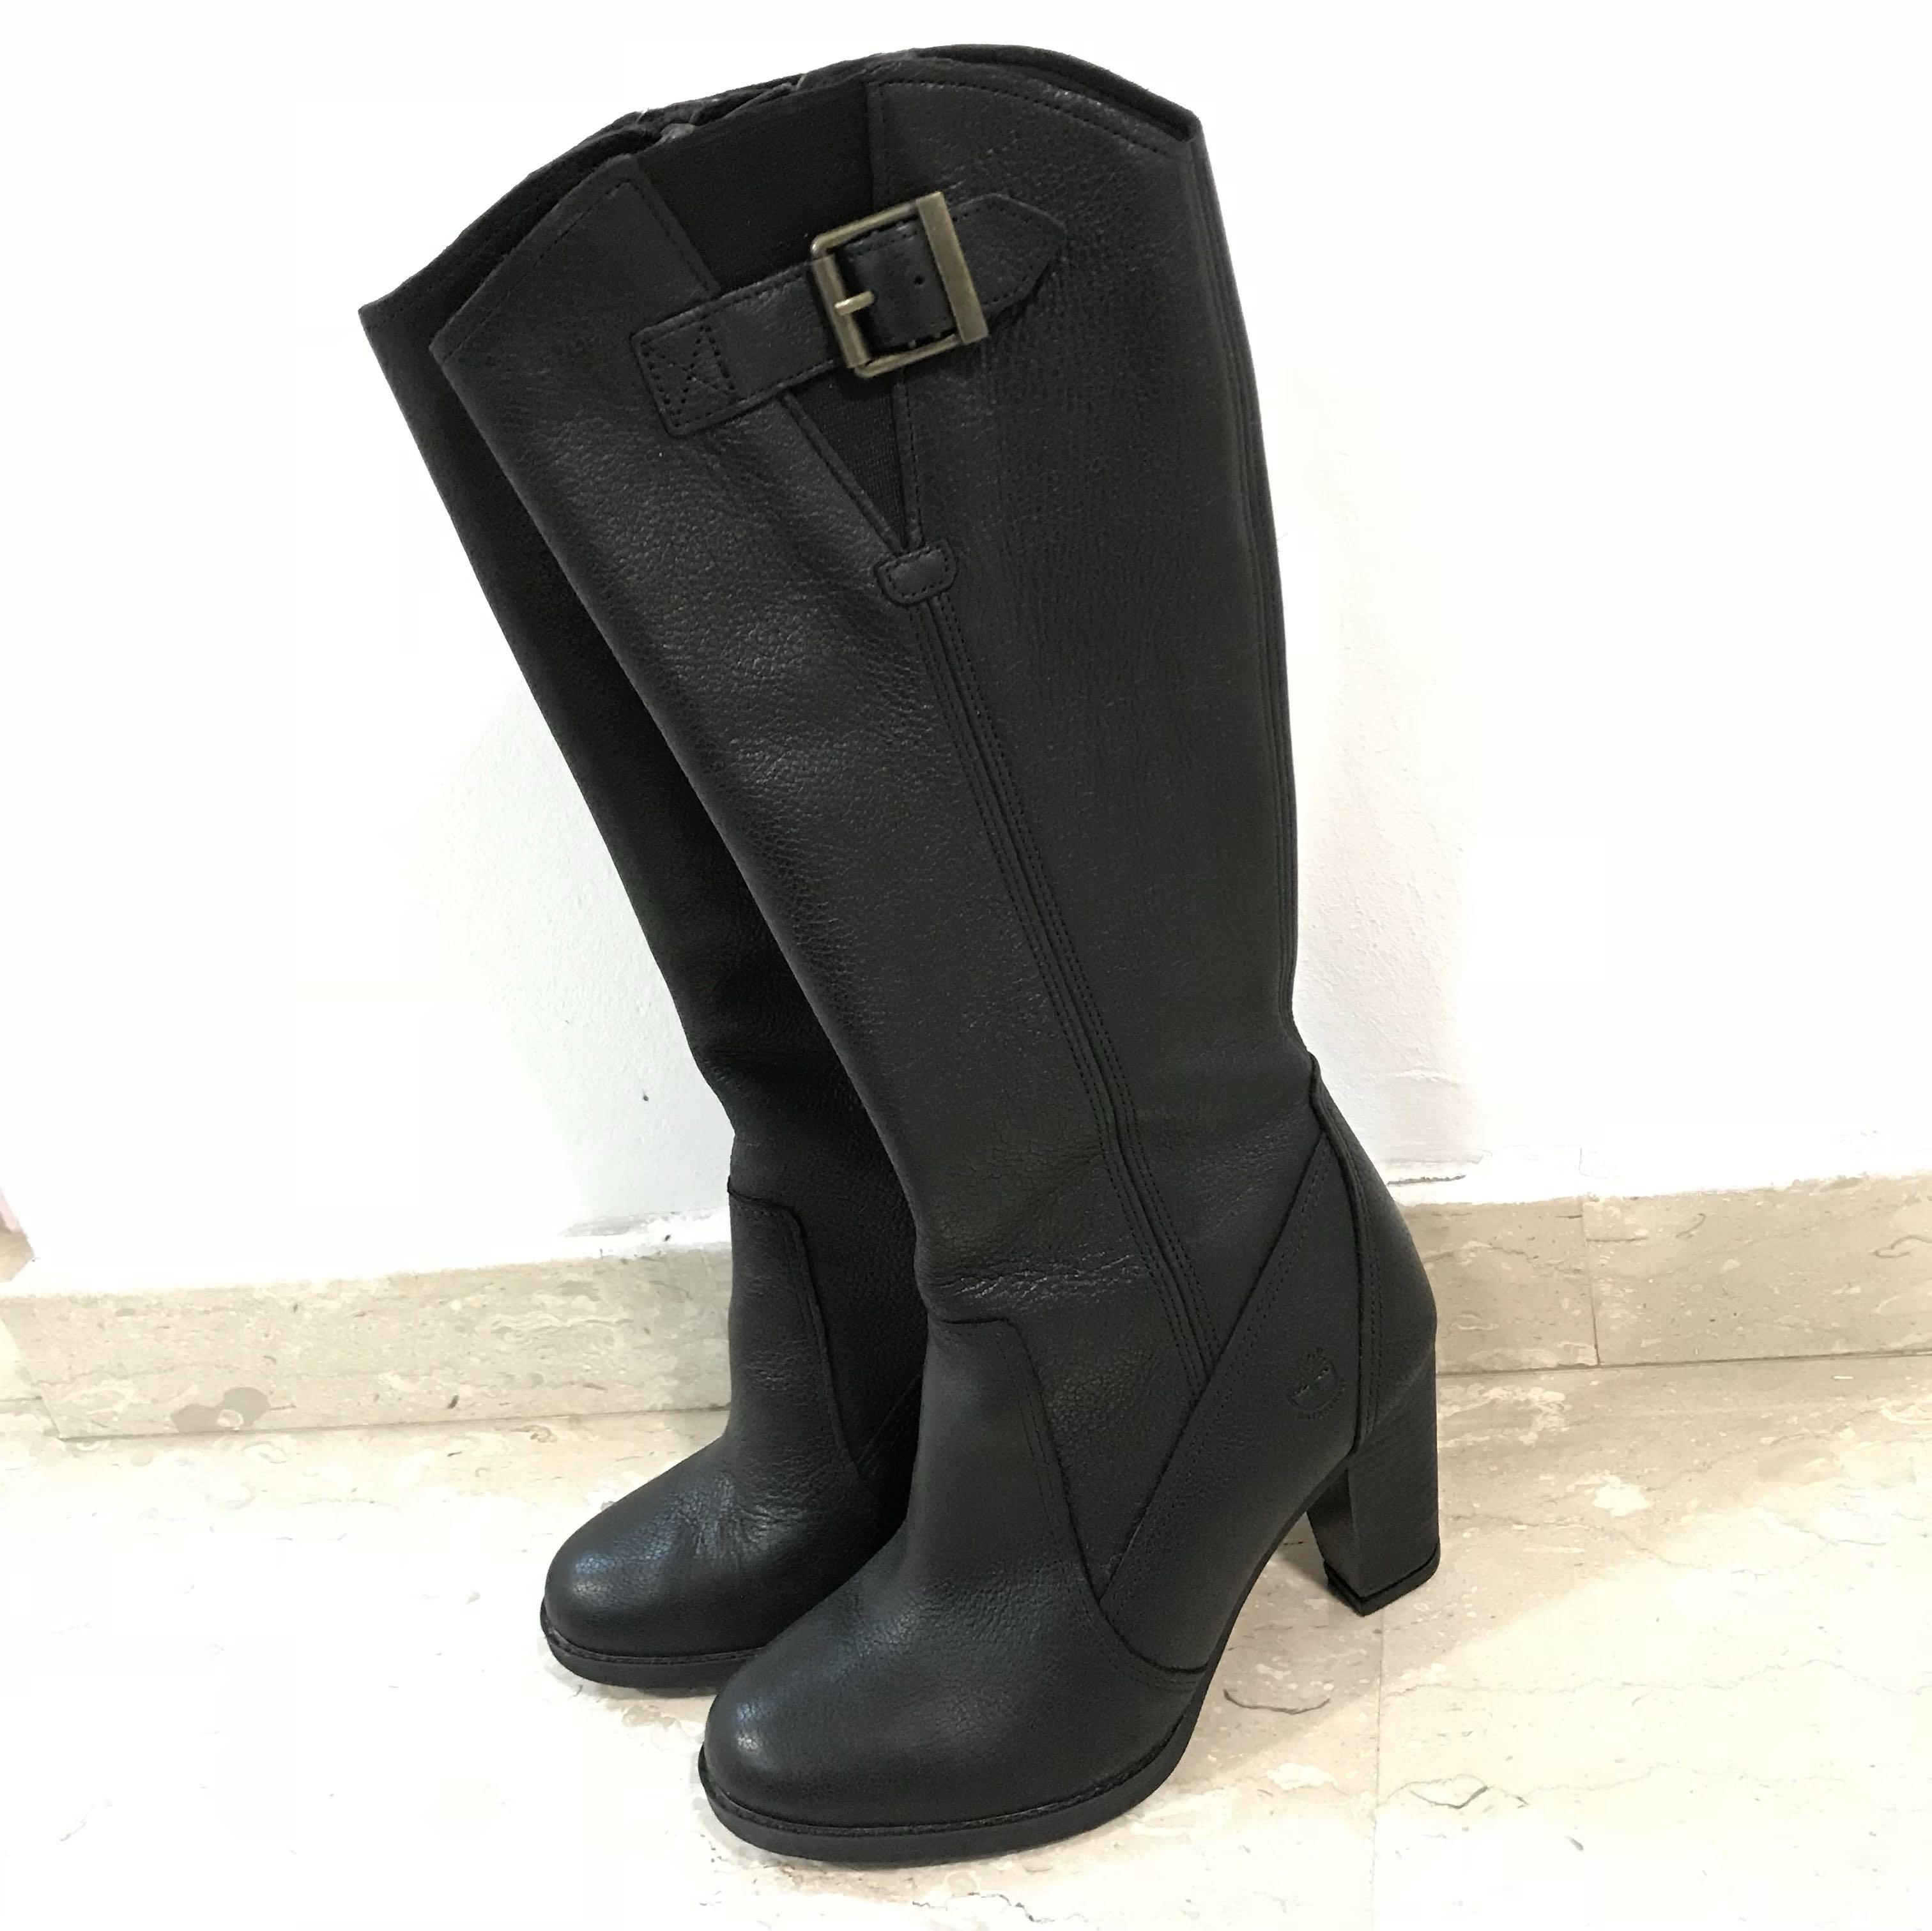 knee high timberland boots for women